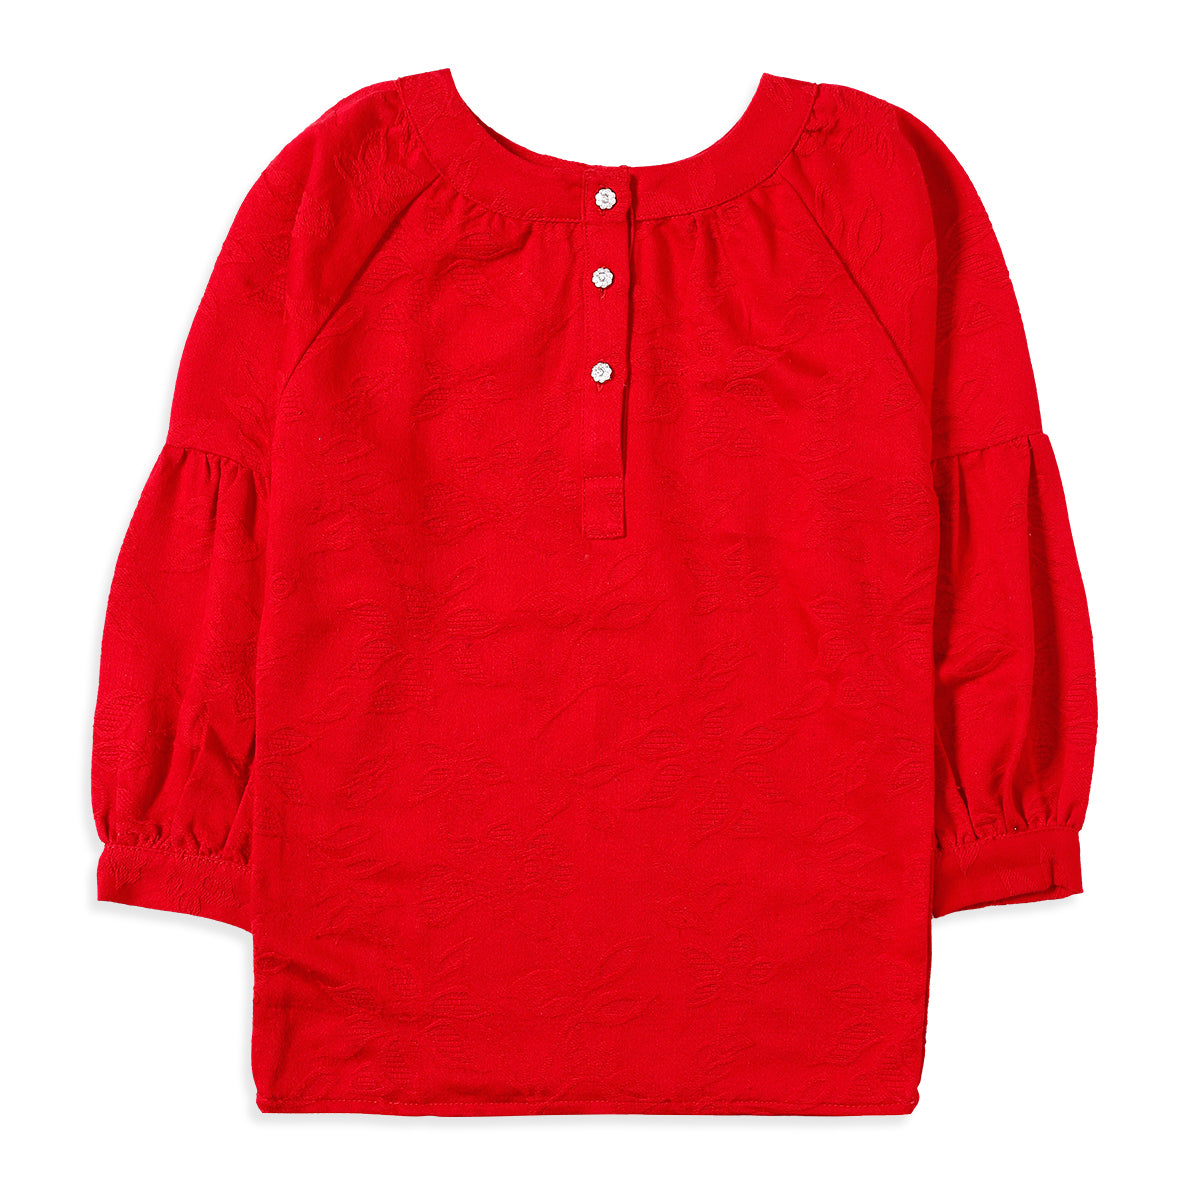 Red Plain Top